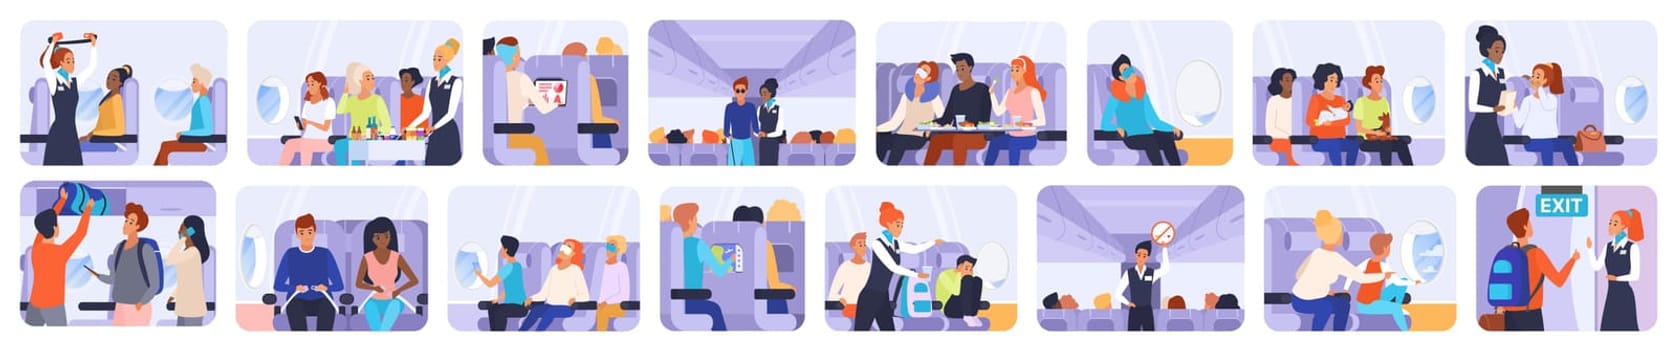 Passengers travel by plane set, inside airplane scenes with people on seats, stewardess